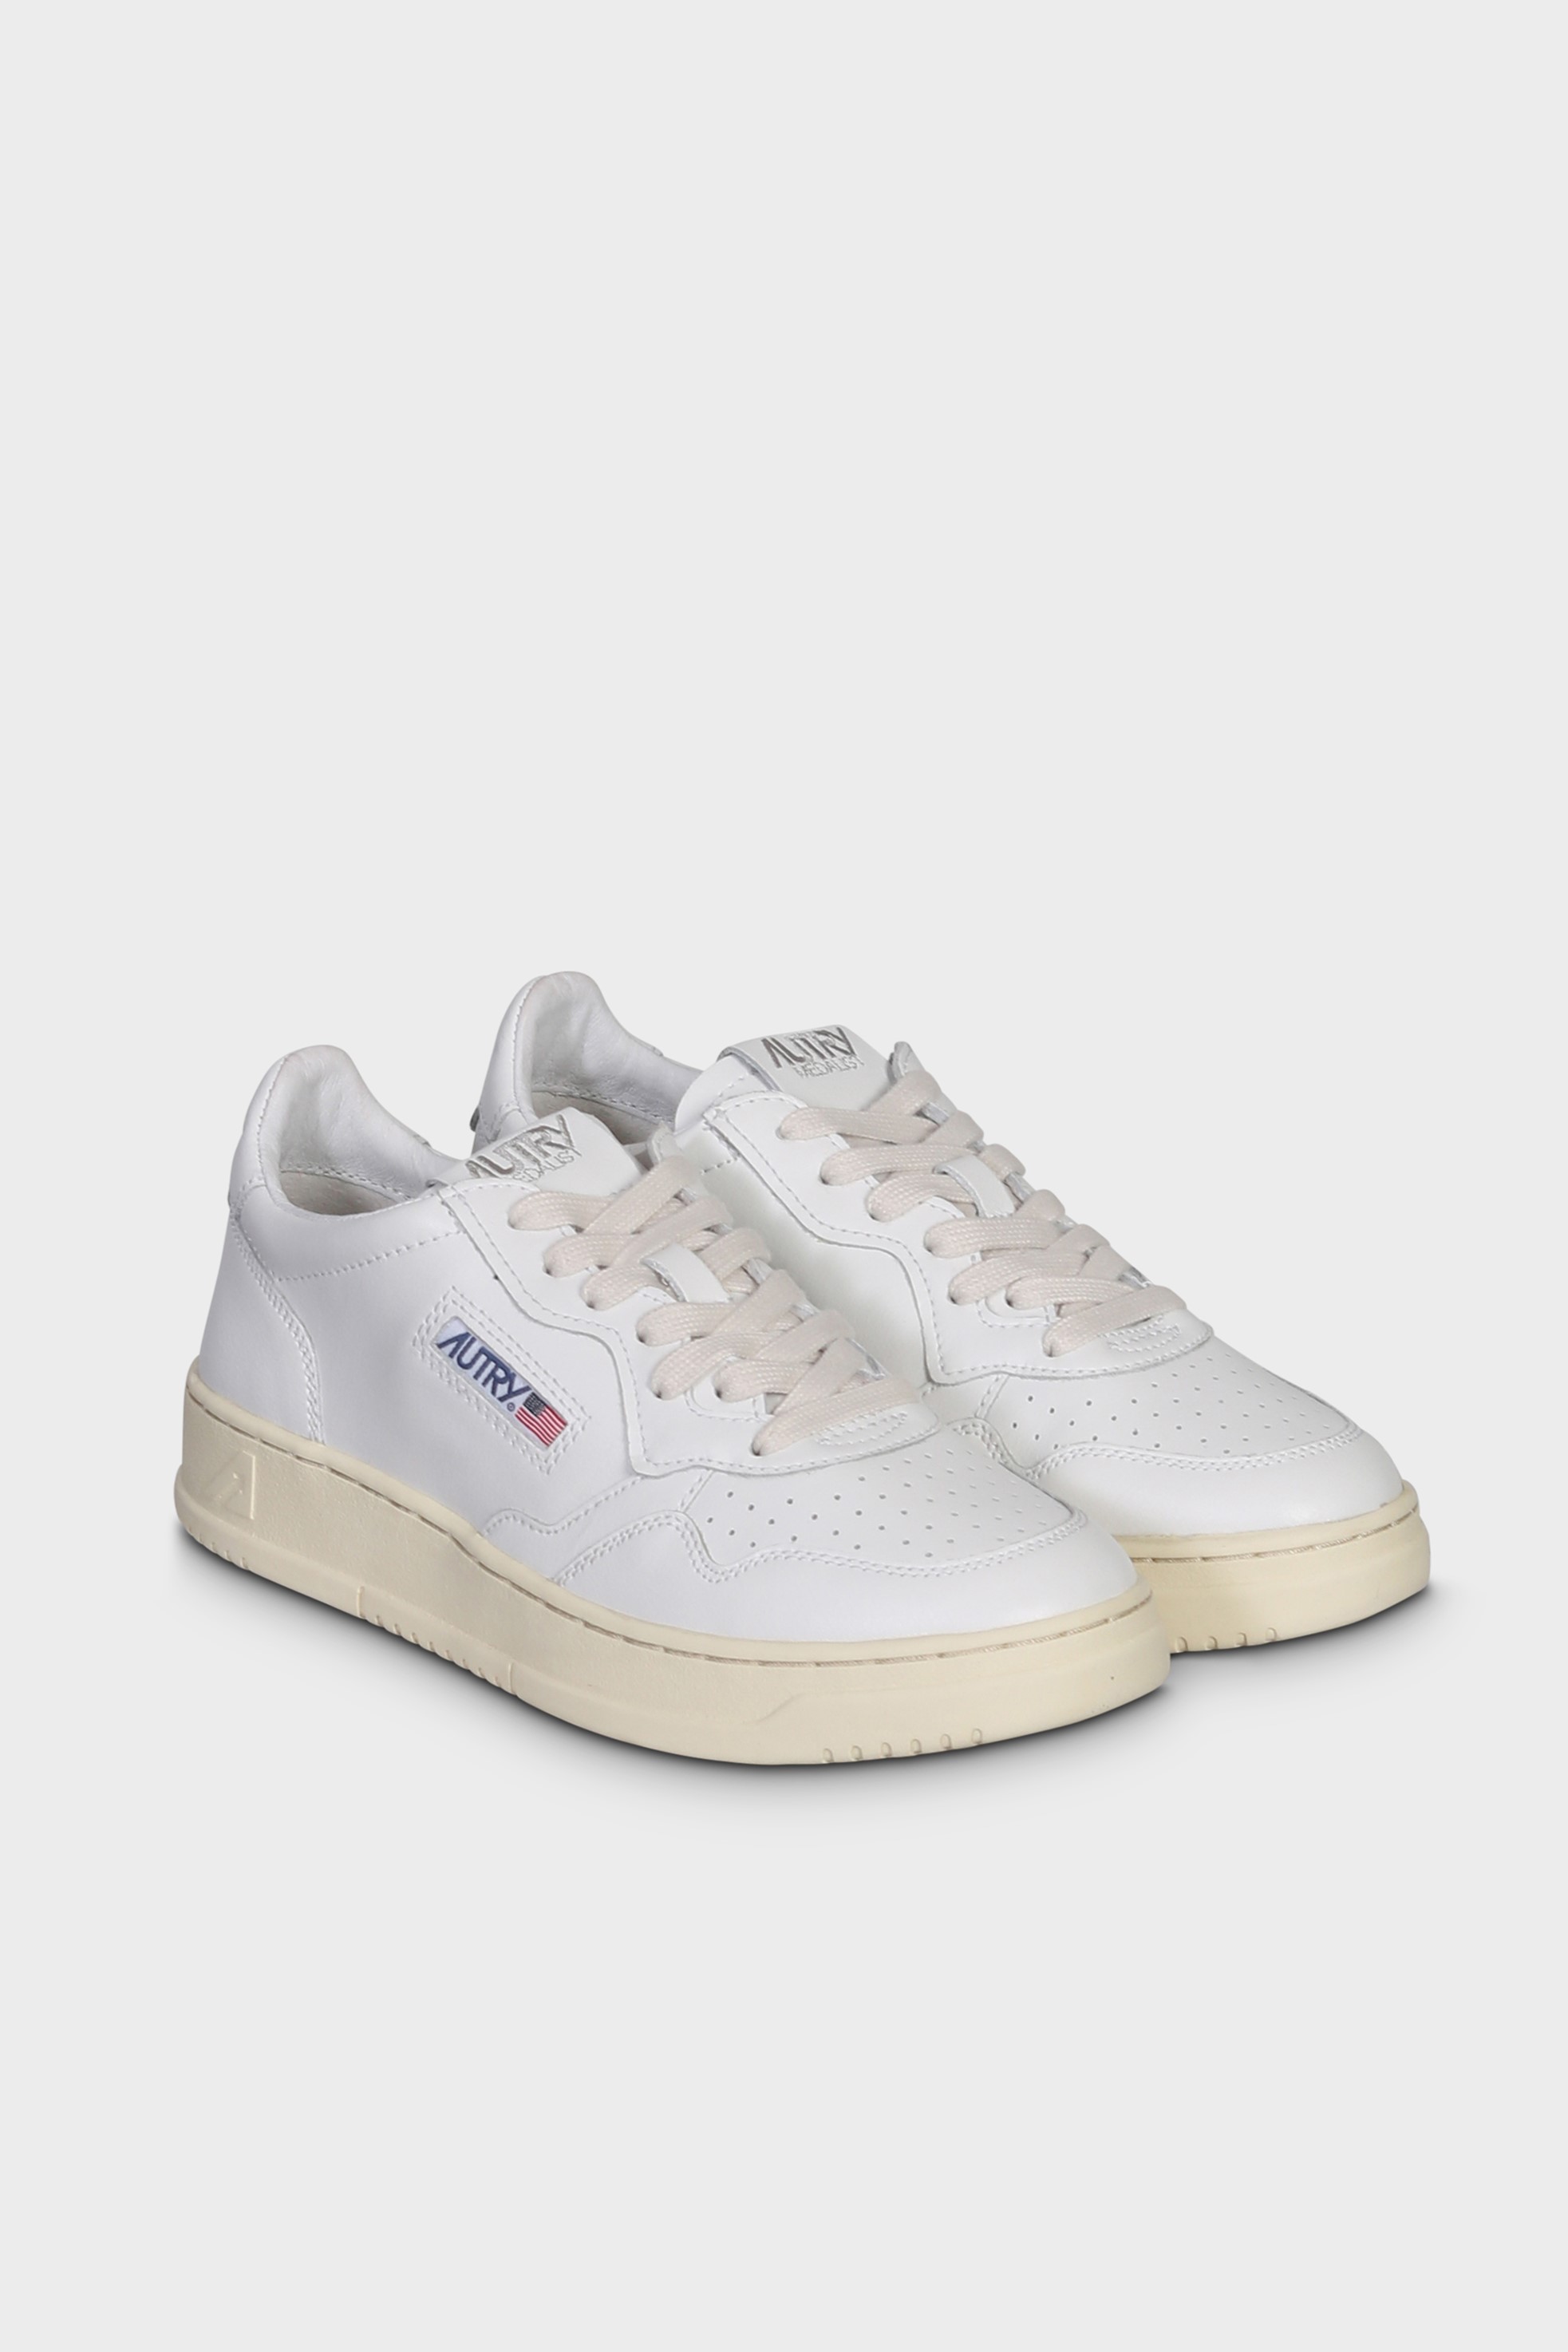 AUTRY ACTION SHOES Medalist Low Sneaker White/White 40